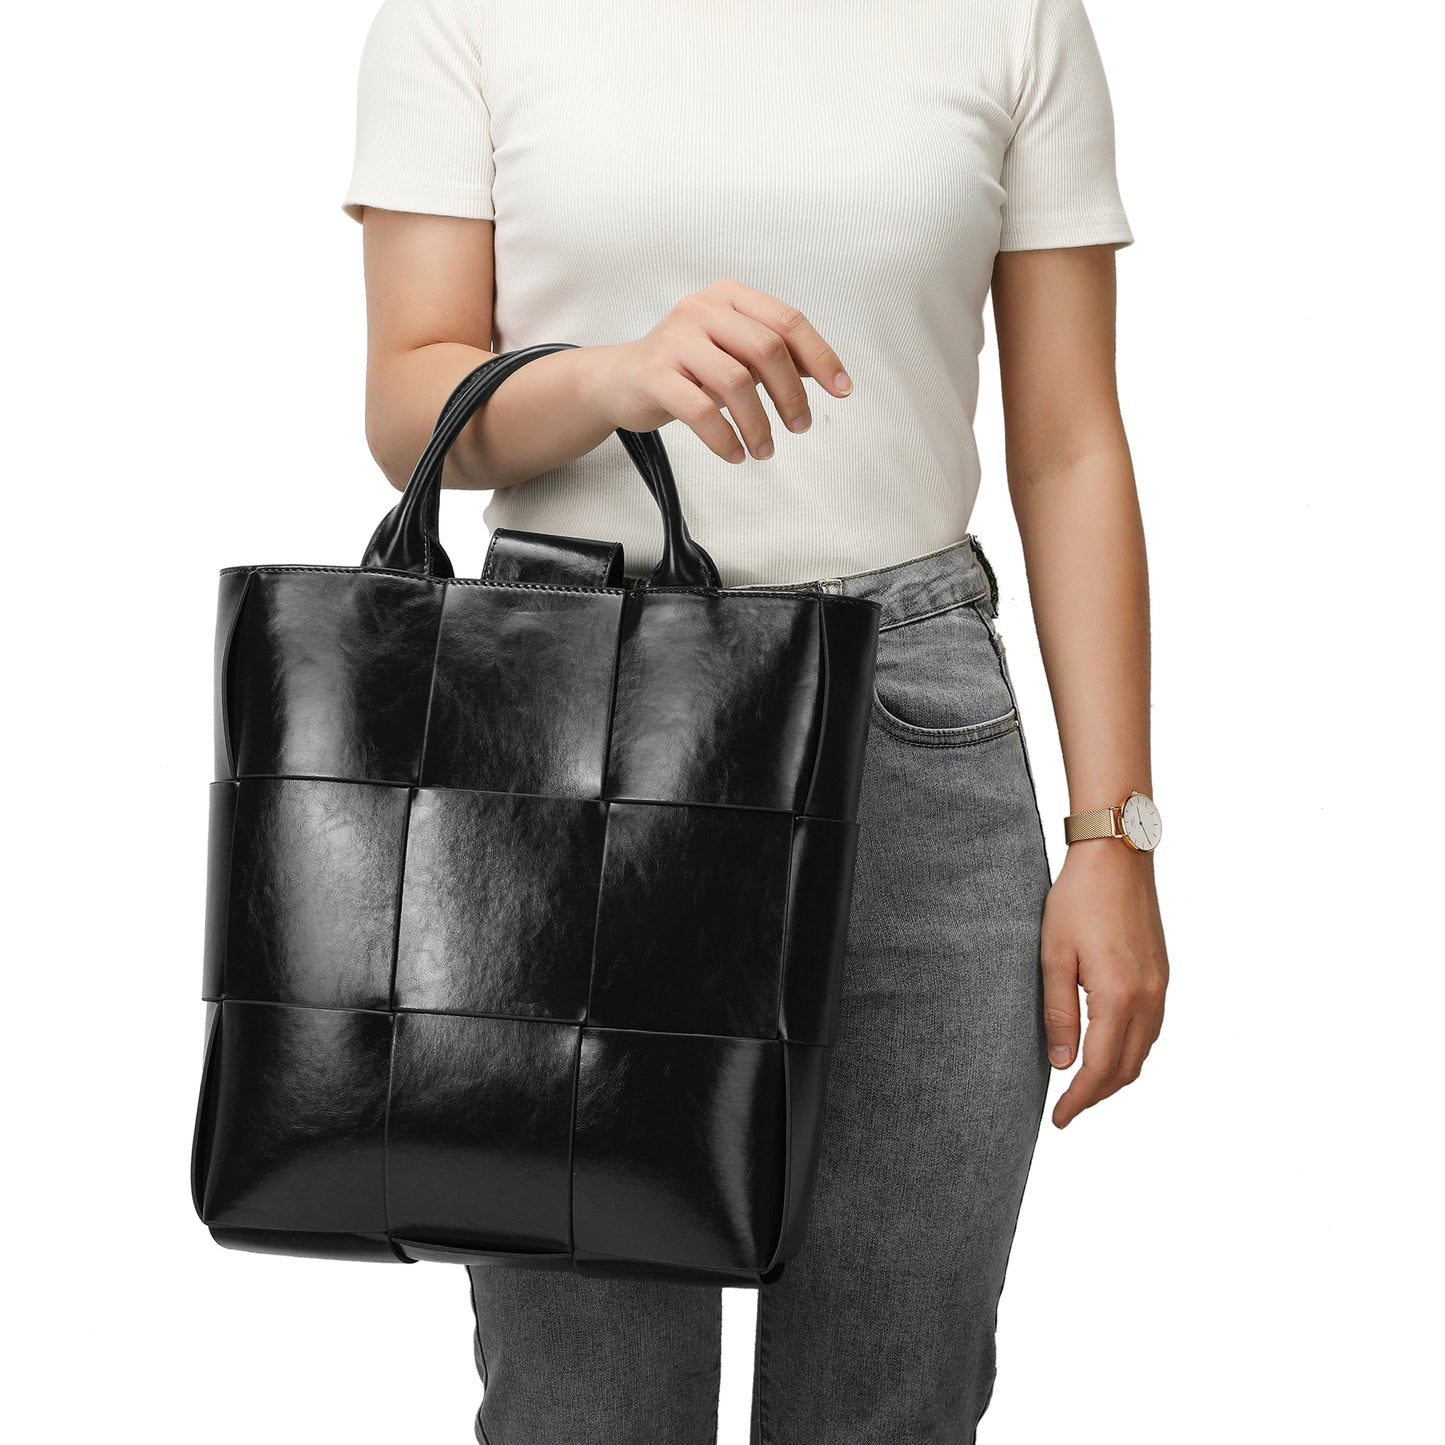 WOVEN LEATHER TOTE BAG - Black